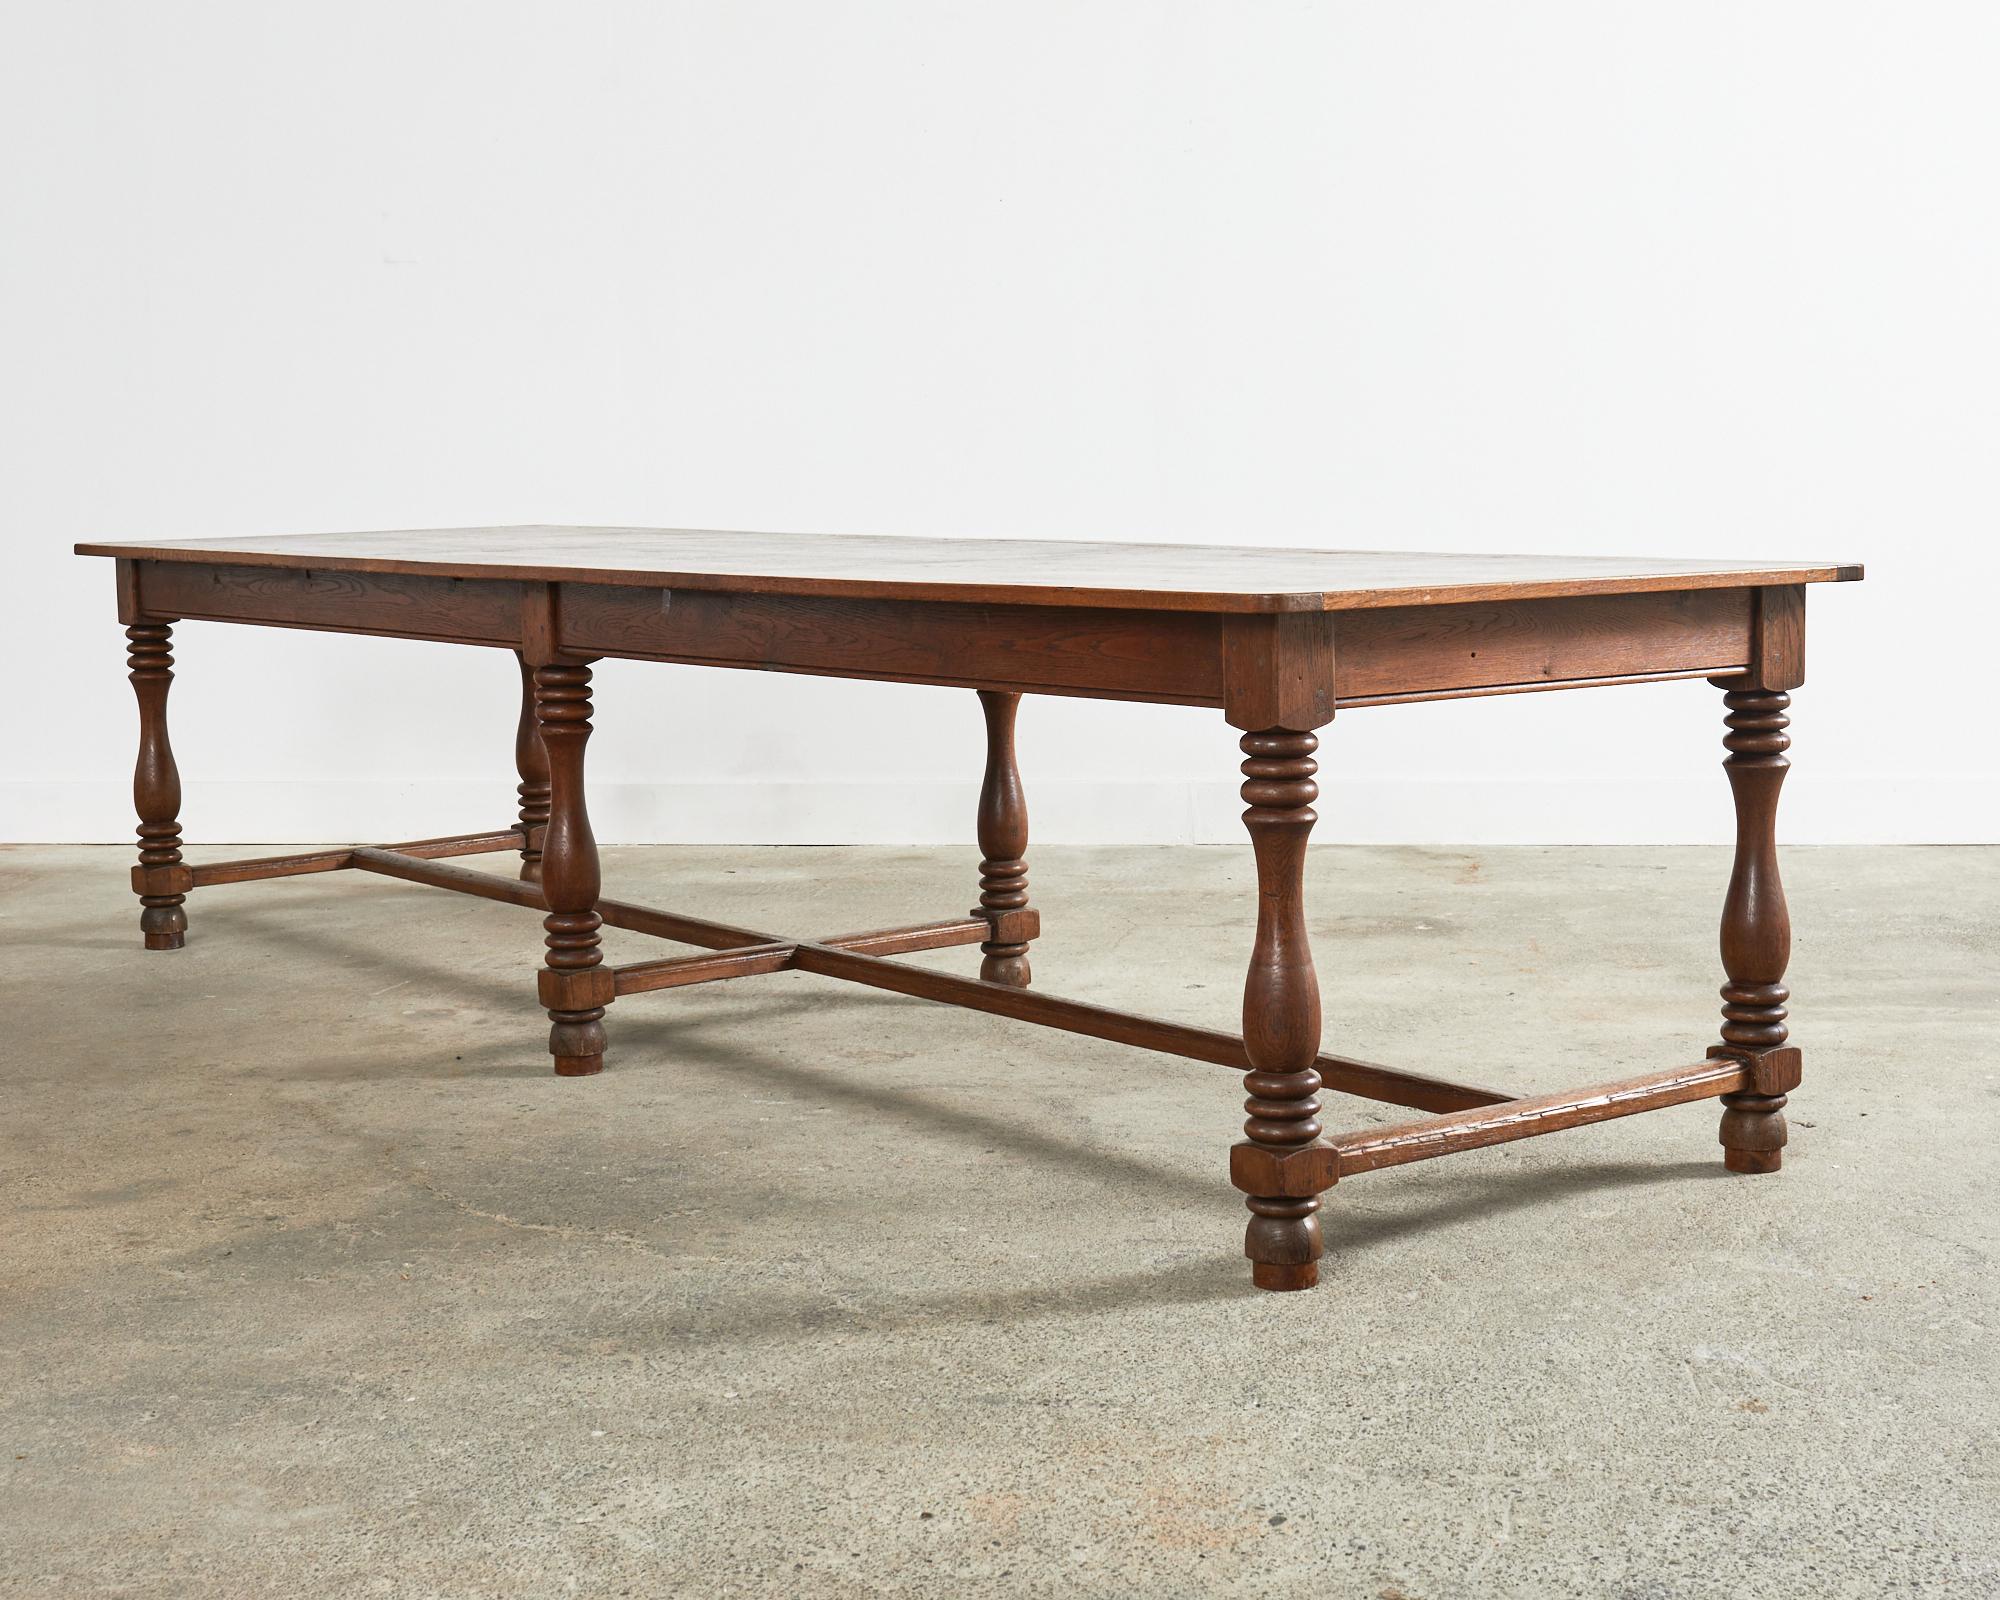 Hand-Crafted 19th Century Country French Provincial Oak Farmhouse Dining Table